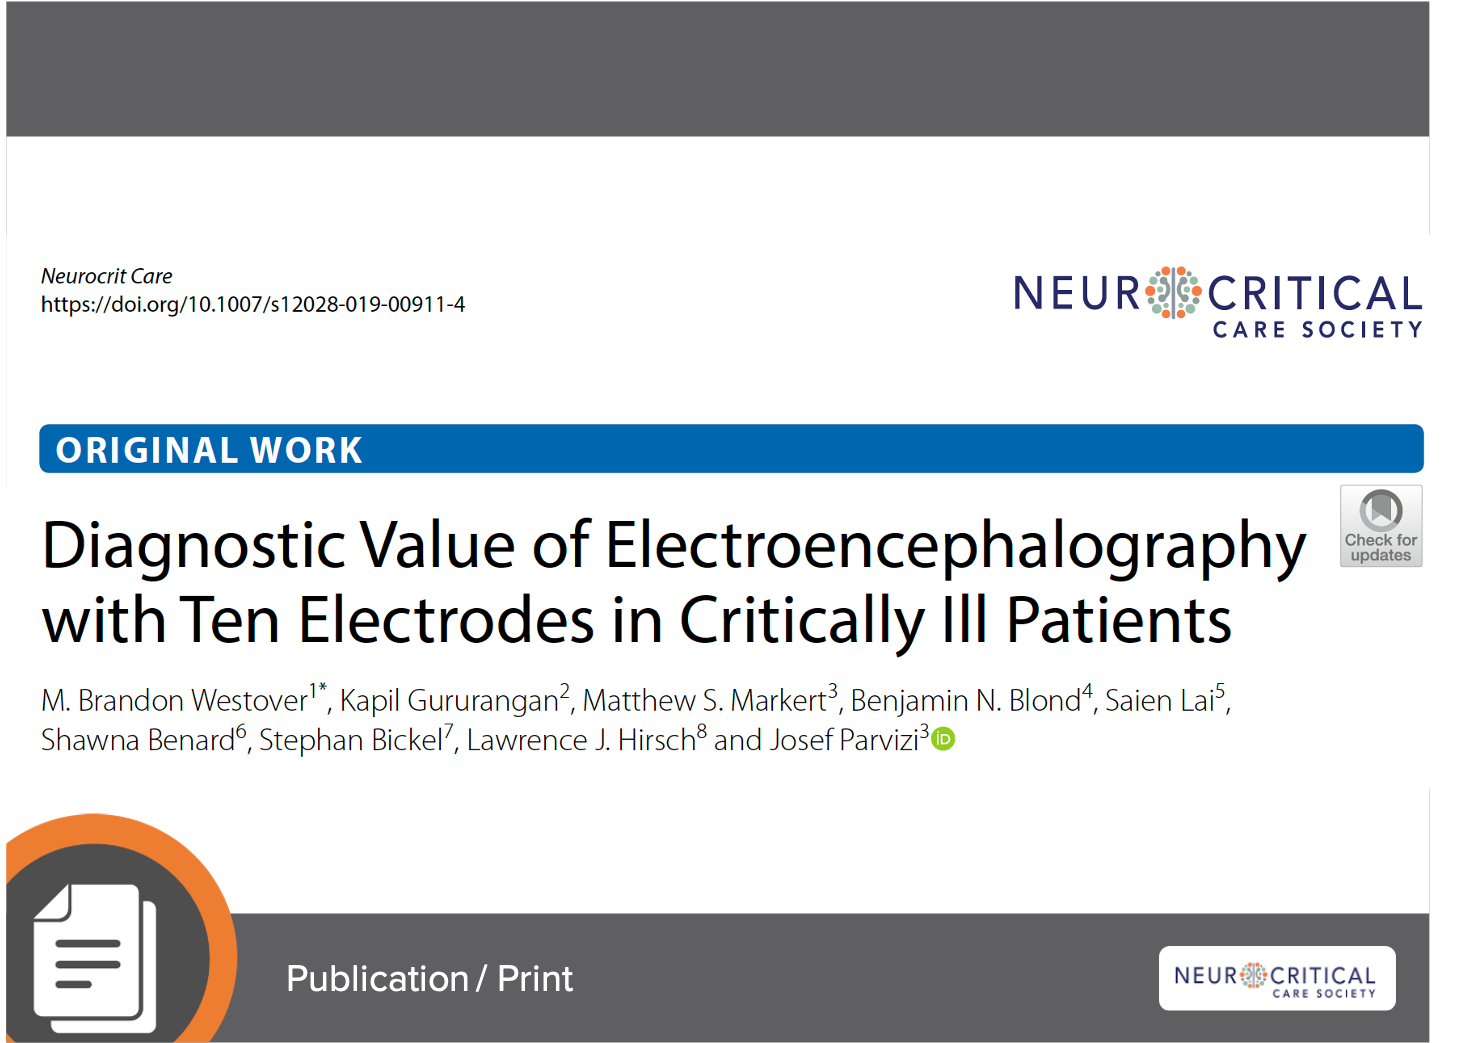 Circumferential Montage Manuscript: Diagnostic Value of Electroencephalography with Ten Electrodes in Critically Ill Patients